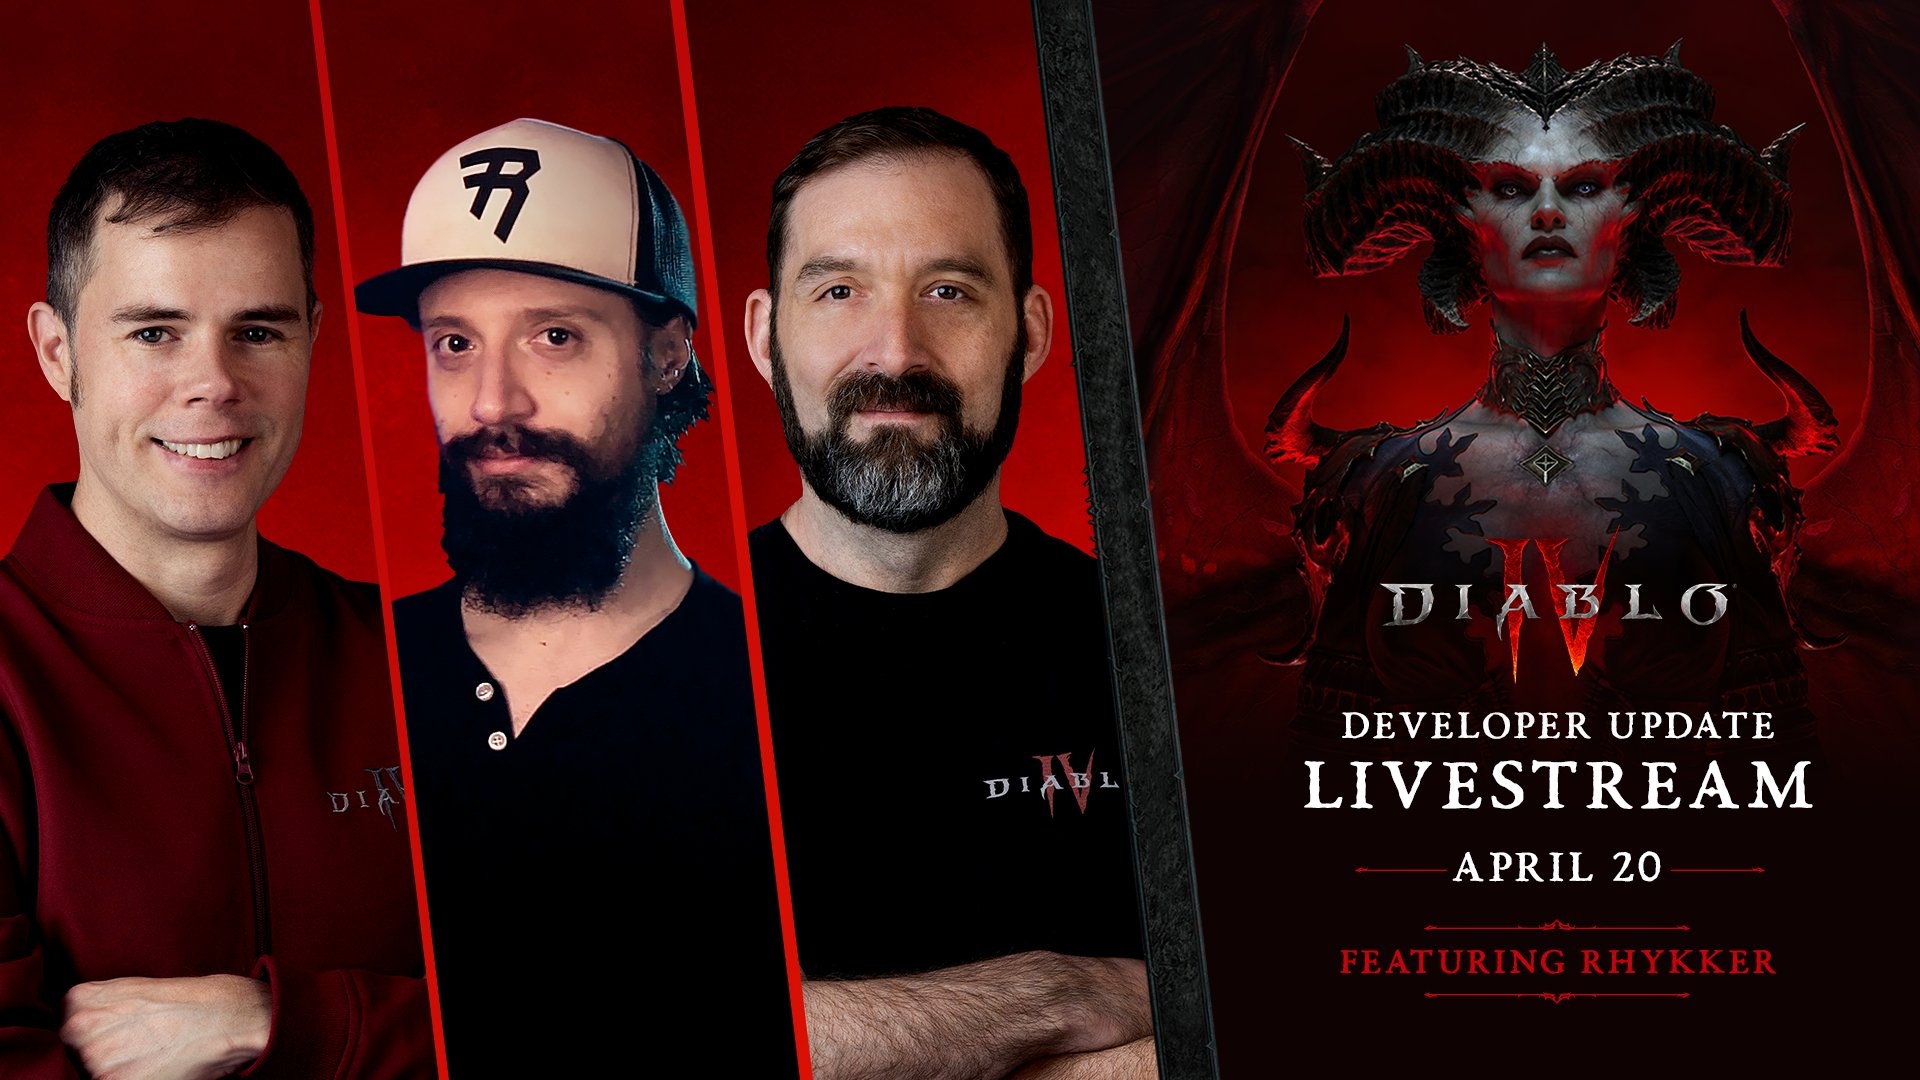 The Diablo IV team will bring us a live broadcast of more than an hour and a half talking about the EndGame, lessons from the beta and much more.